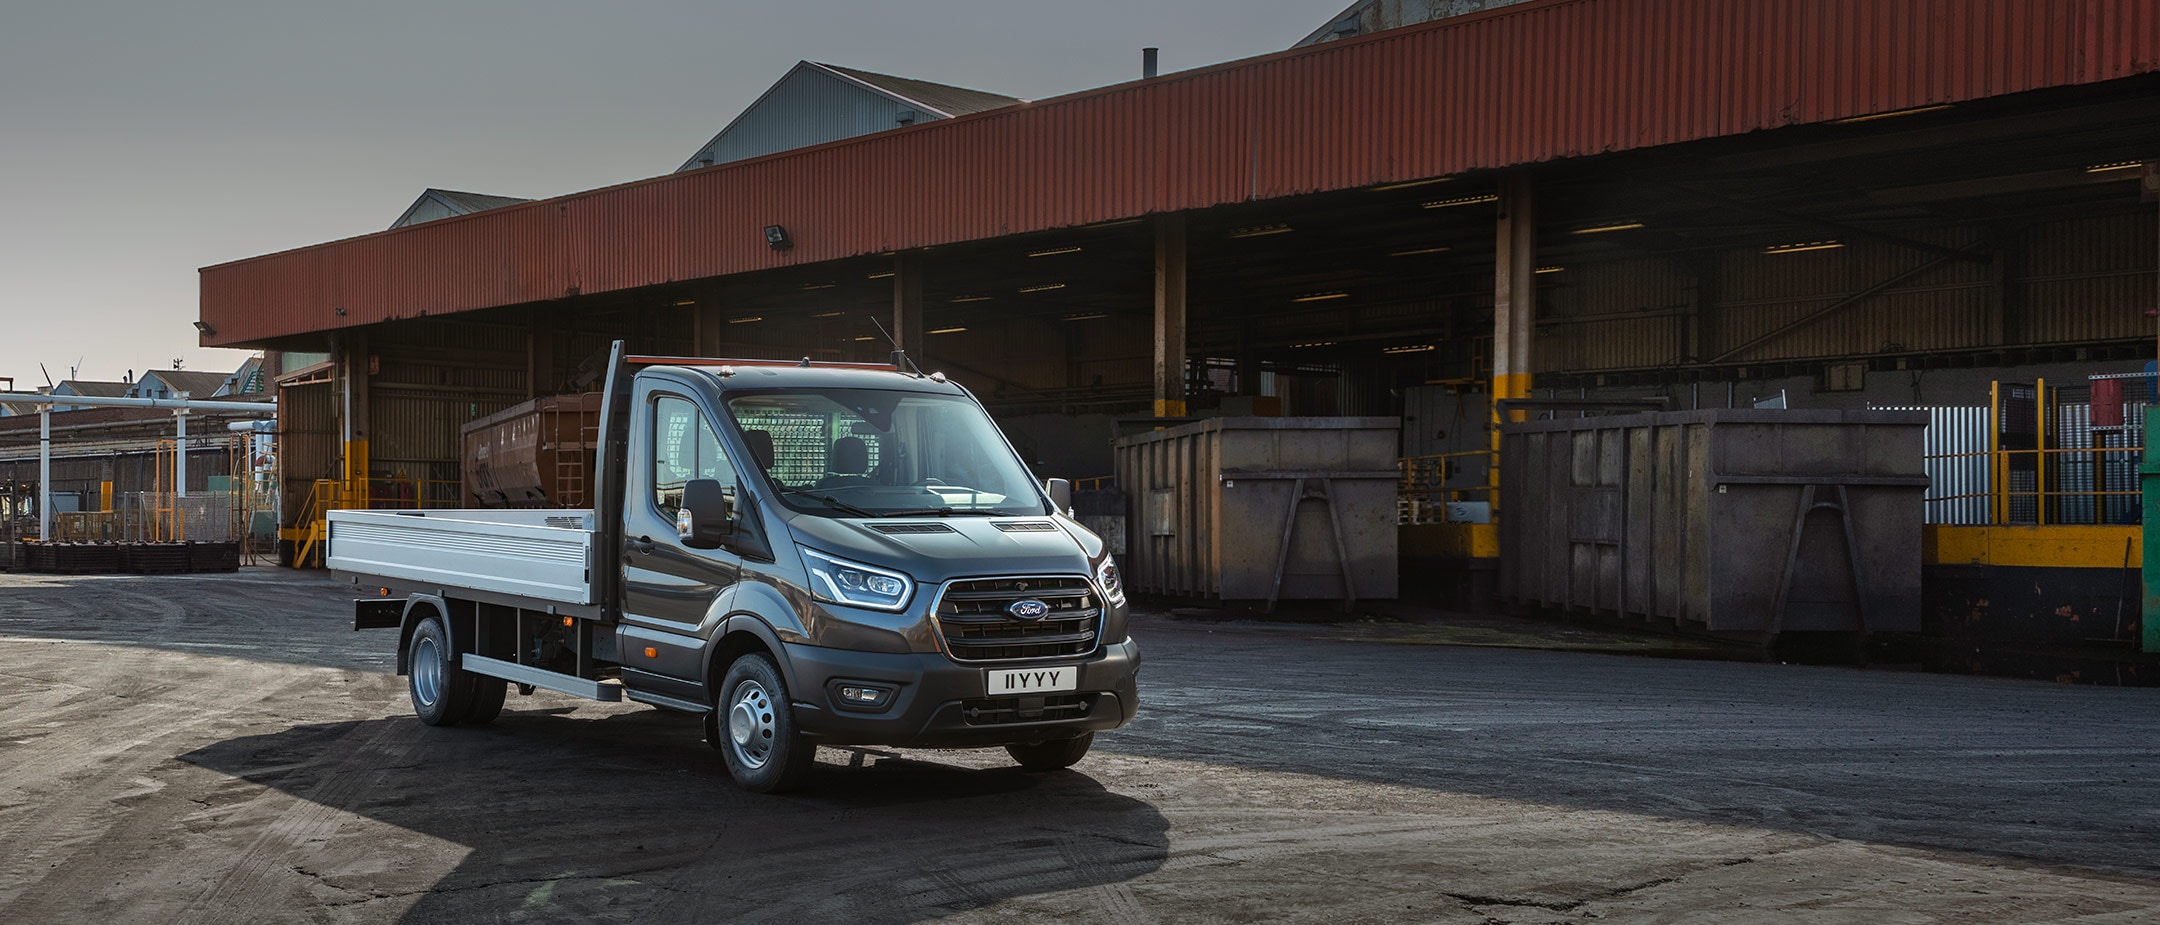 New Ford Transit Chassis Cab on construction site